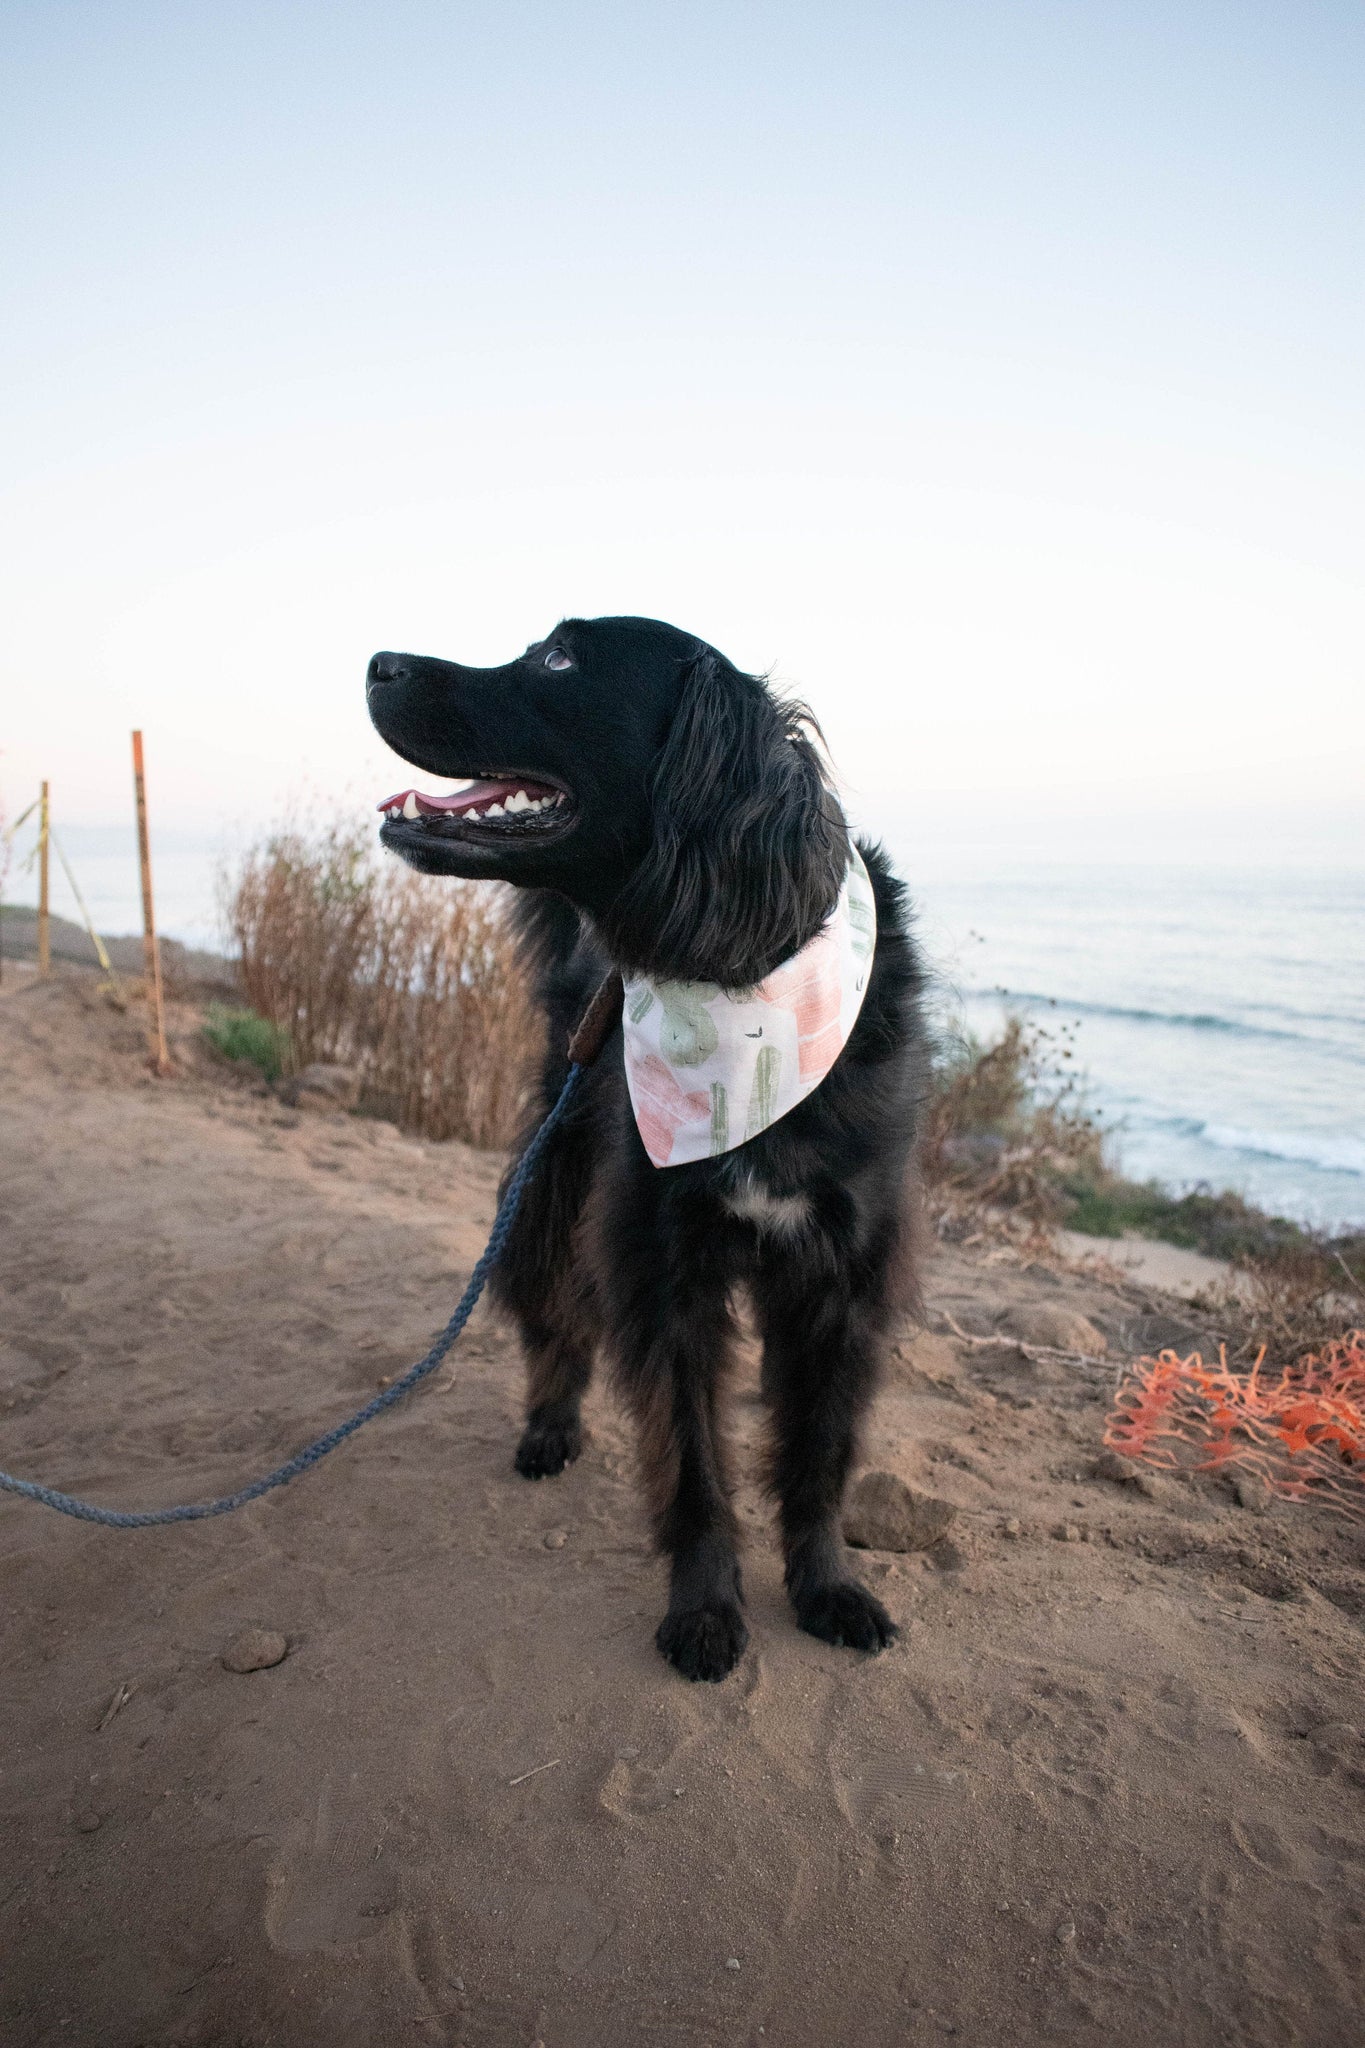 Oreo, the black lab and collie mix, sporting the Sunkissed Cactus dog bandana